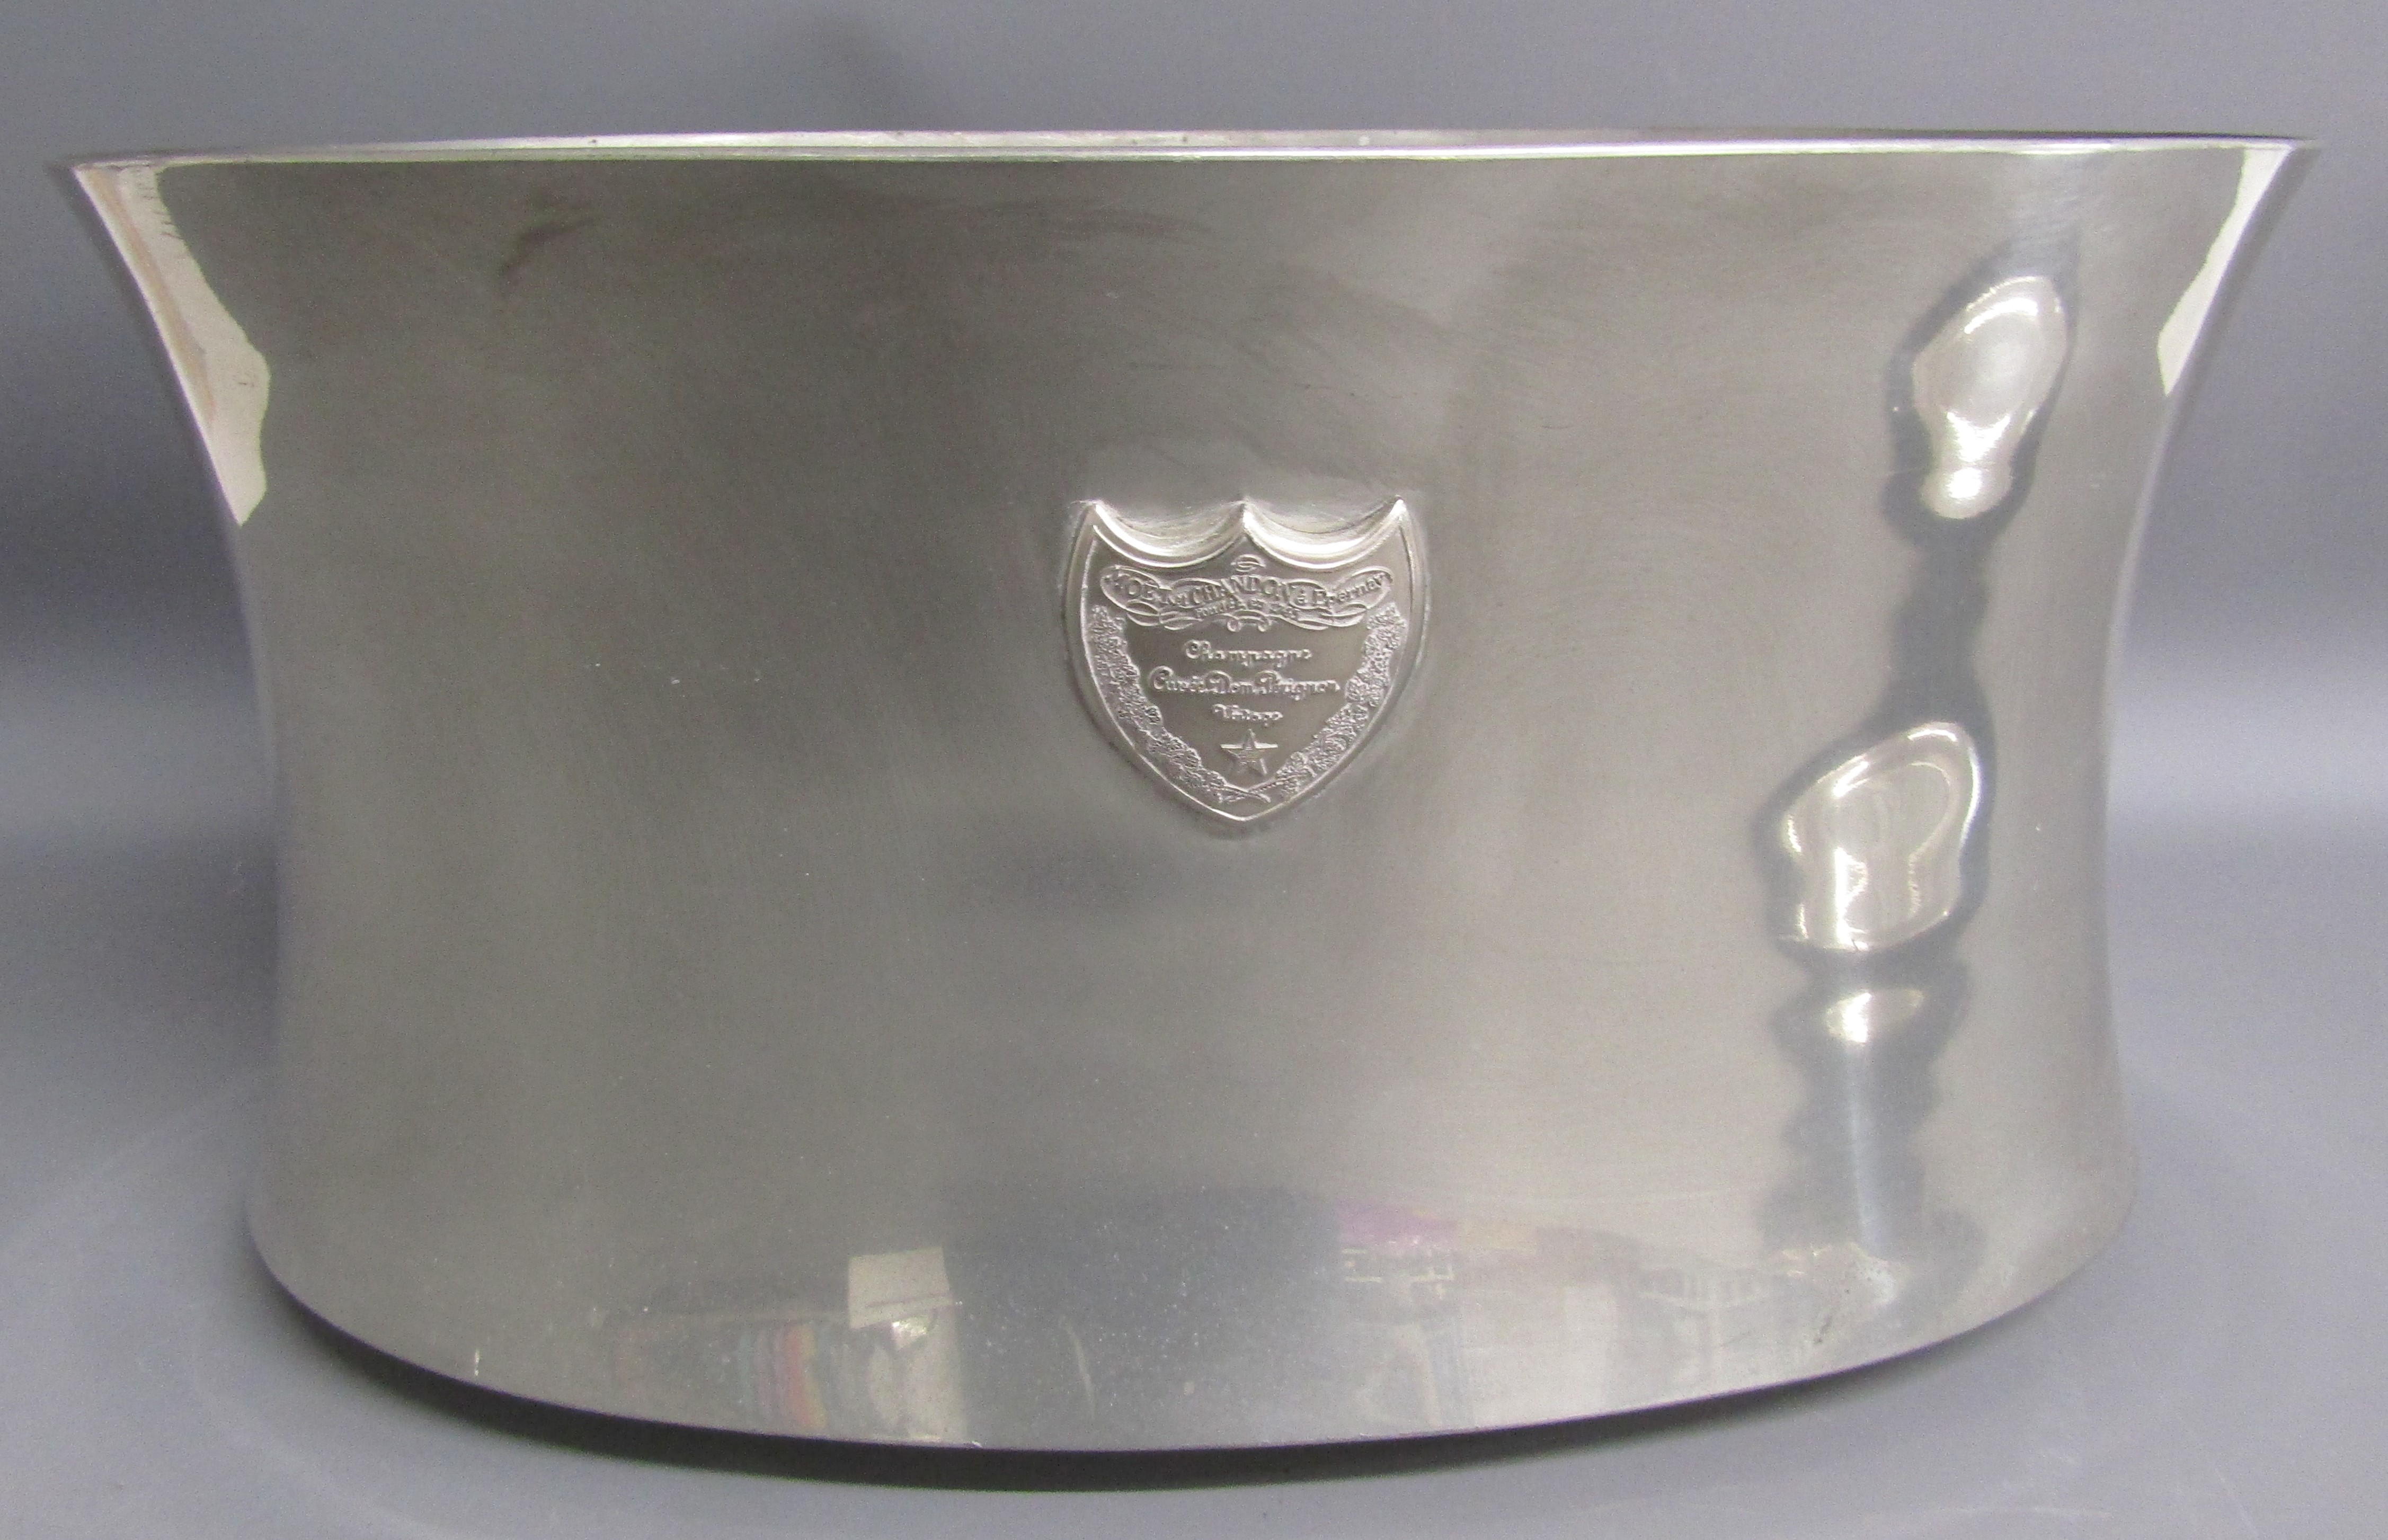 M Szekely Dom Perignon pewter wine cooler and silver plate tray - approx. 43.5cm dia - Image 11 of 14